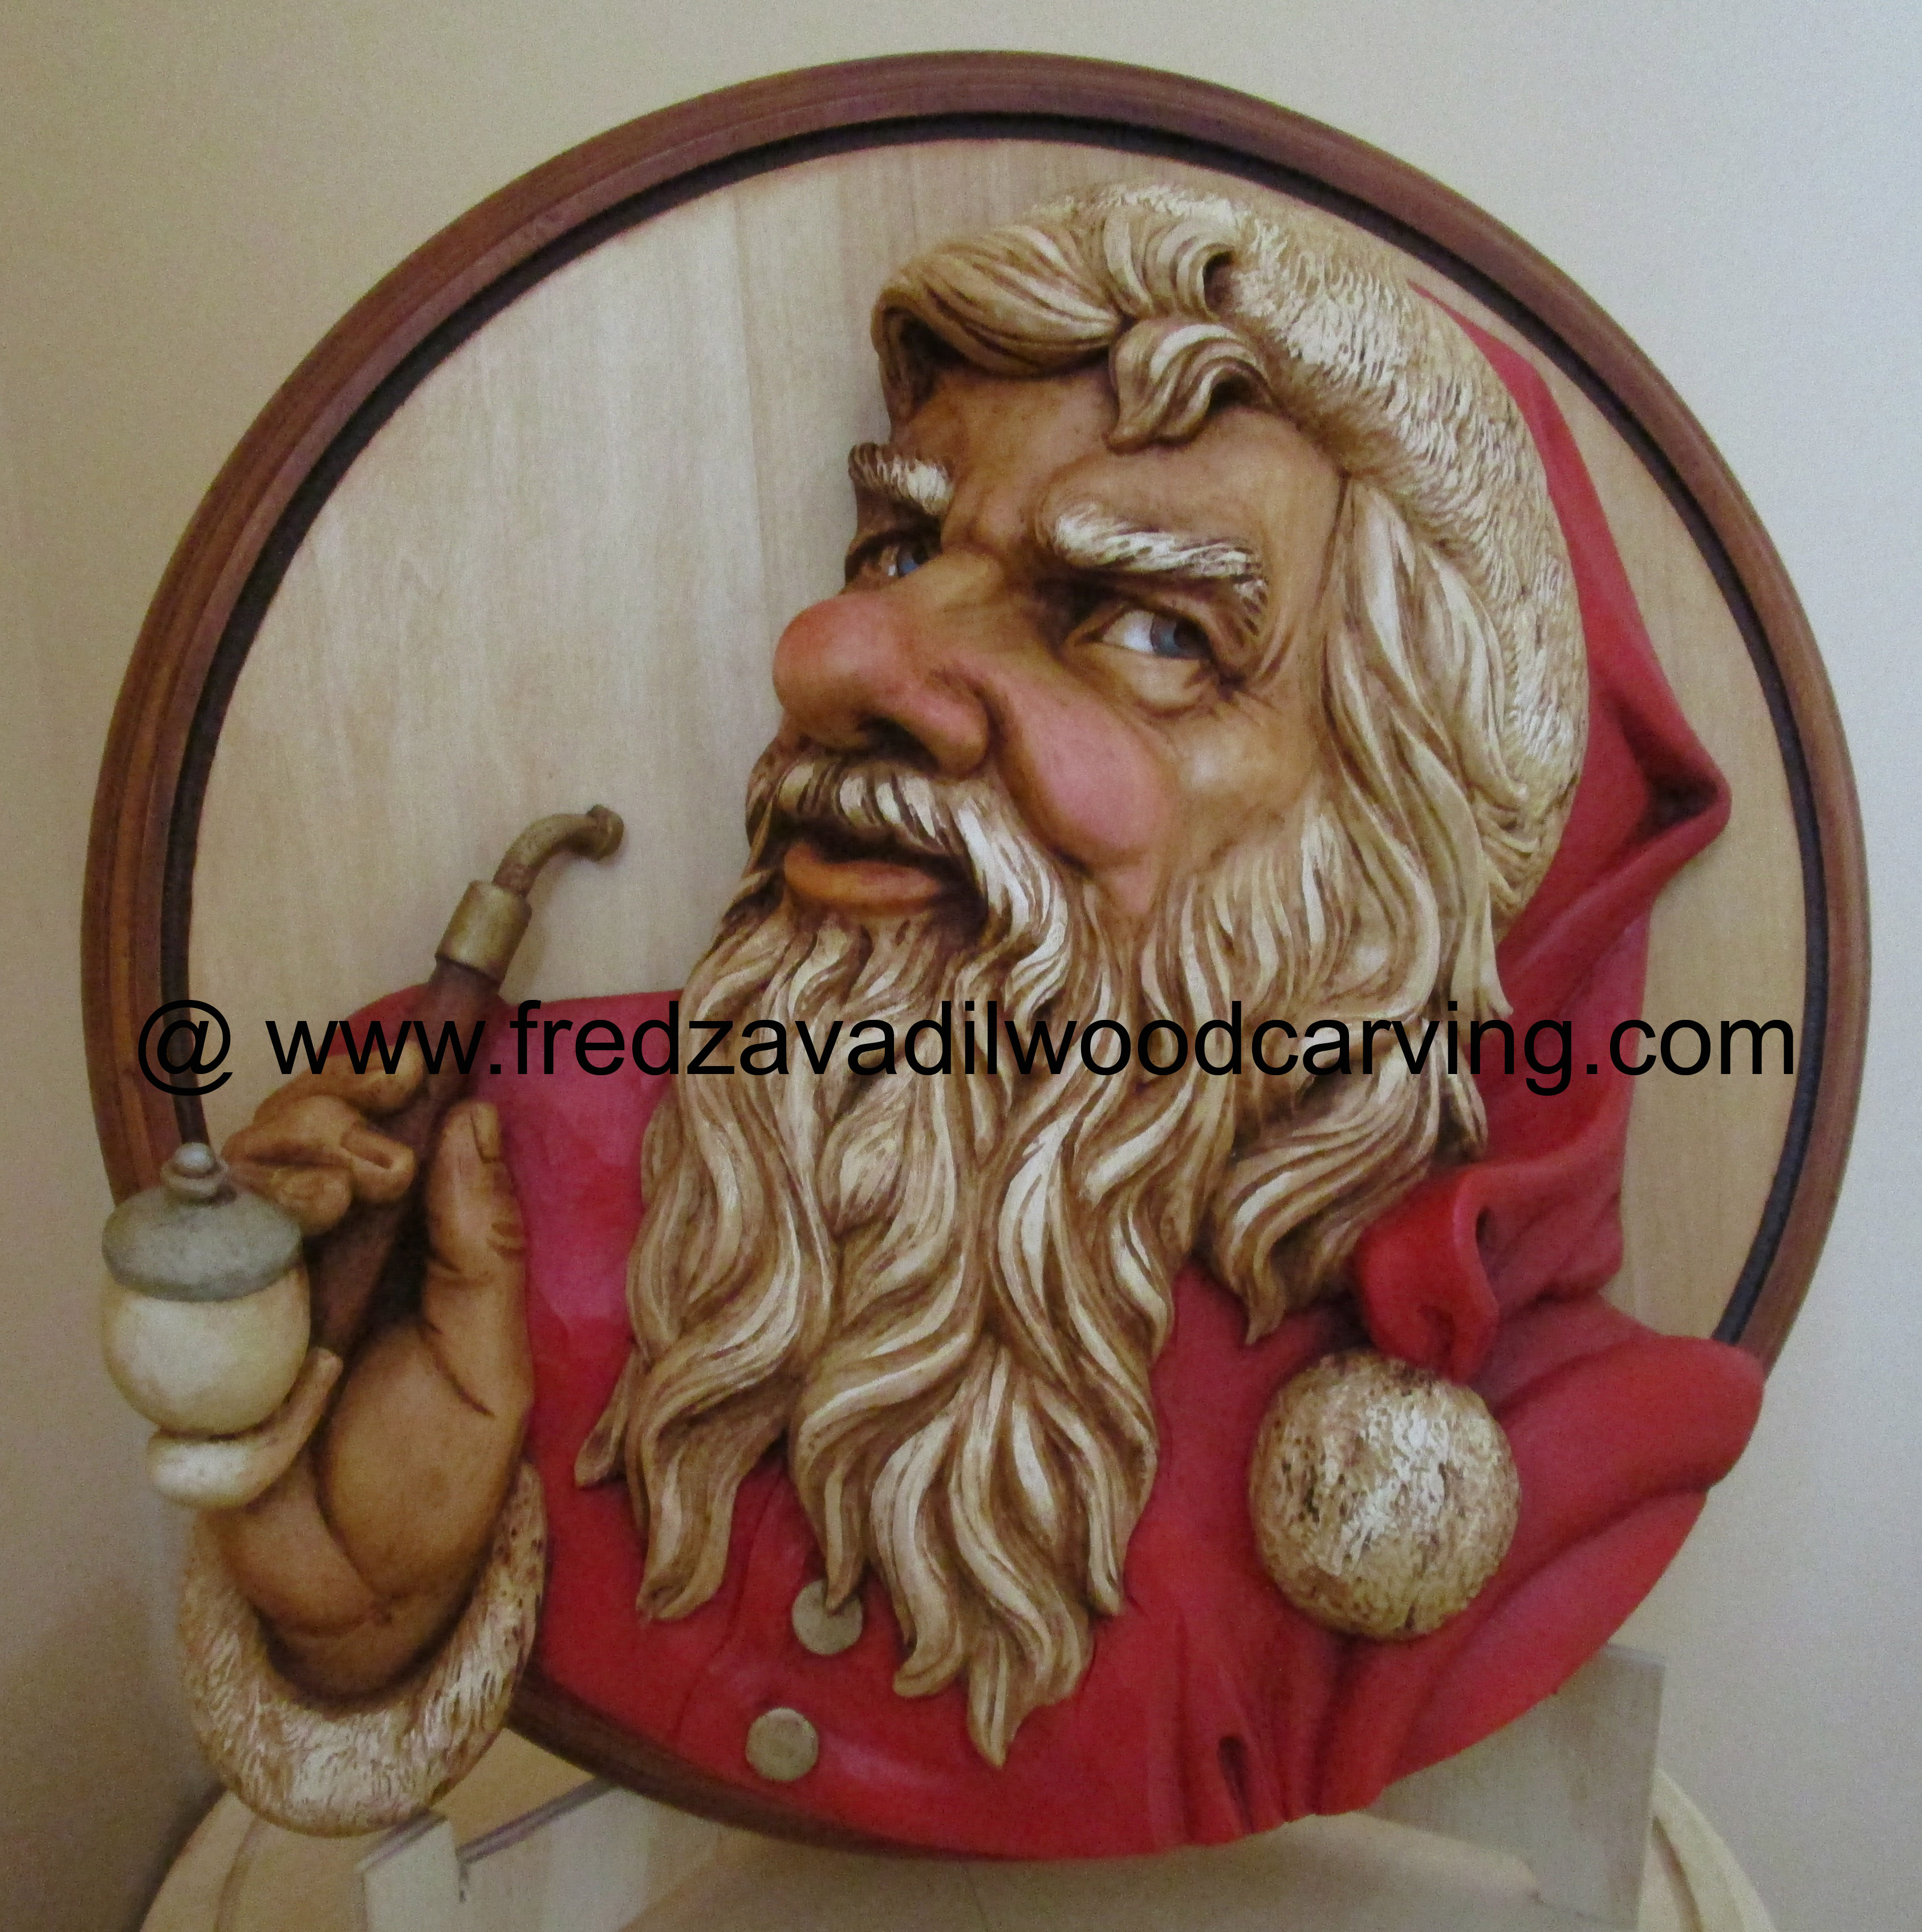 Santa Claus, one of the projects for Fred's wood carving workshops. Relief wood carving, painted and stained